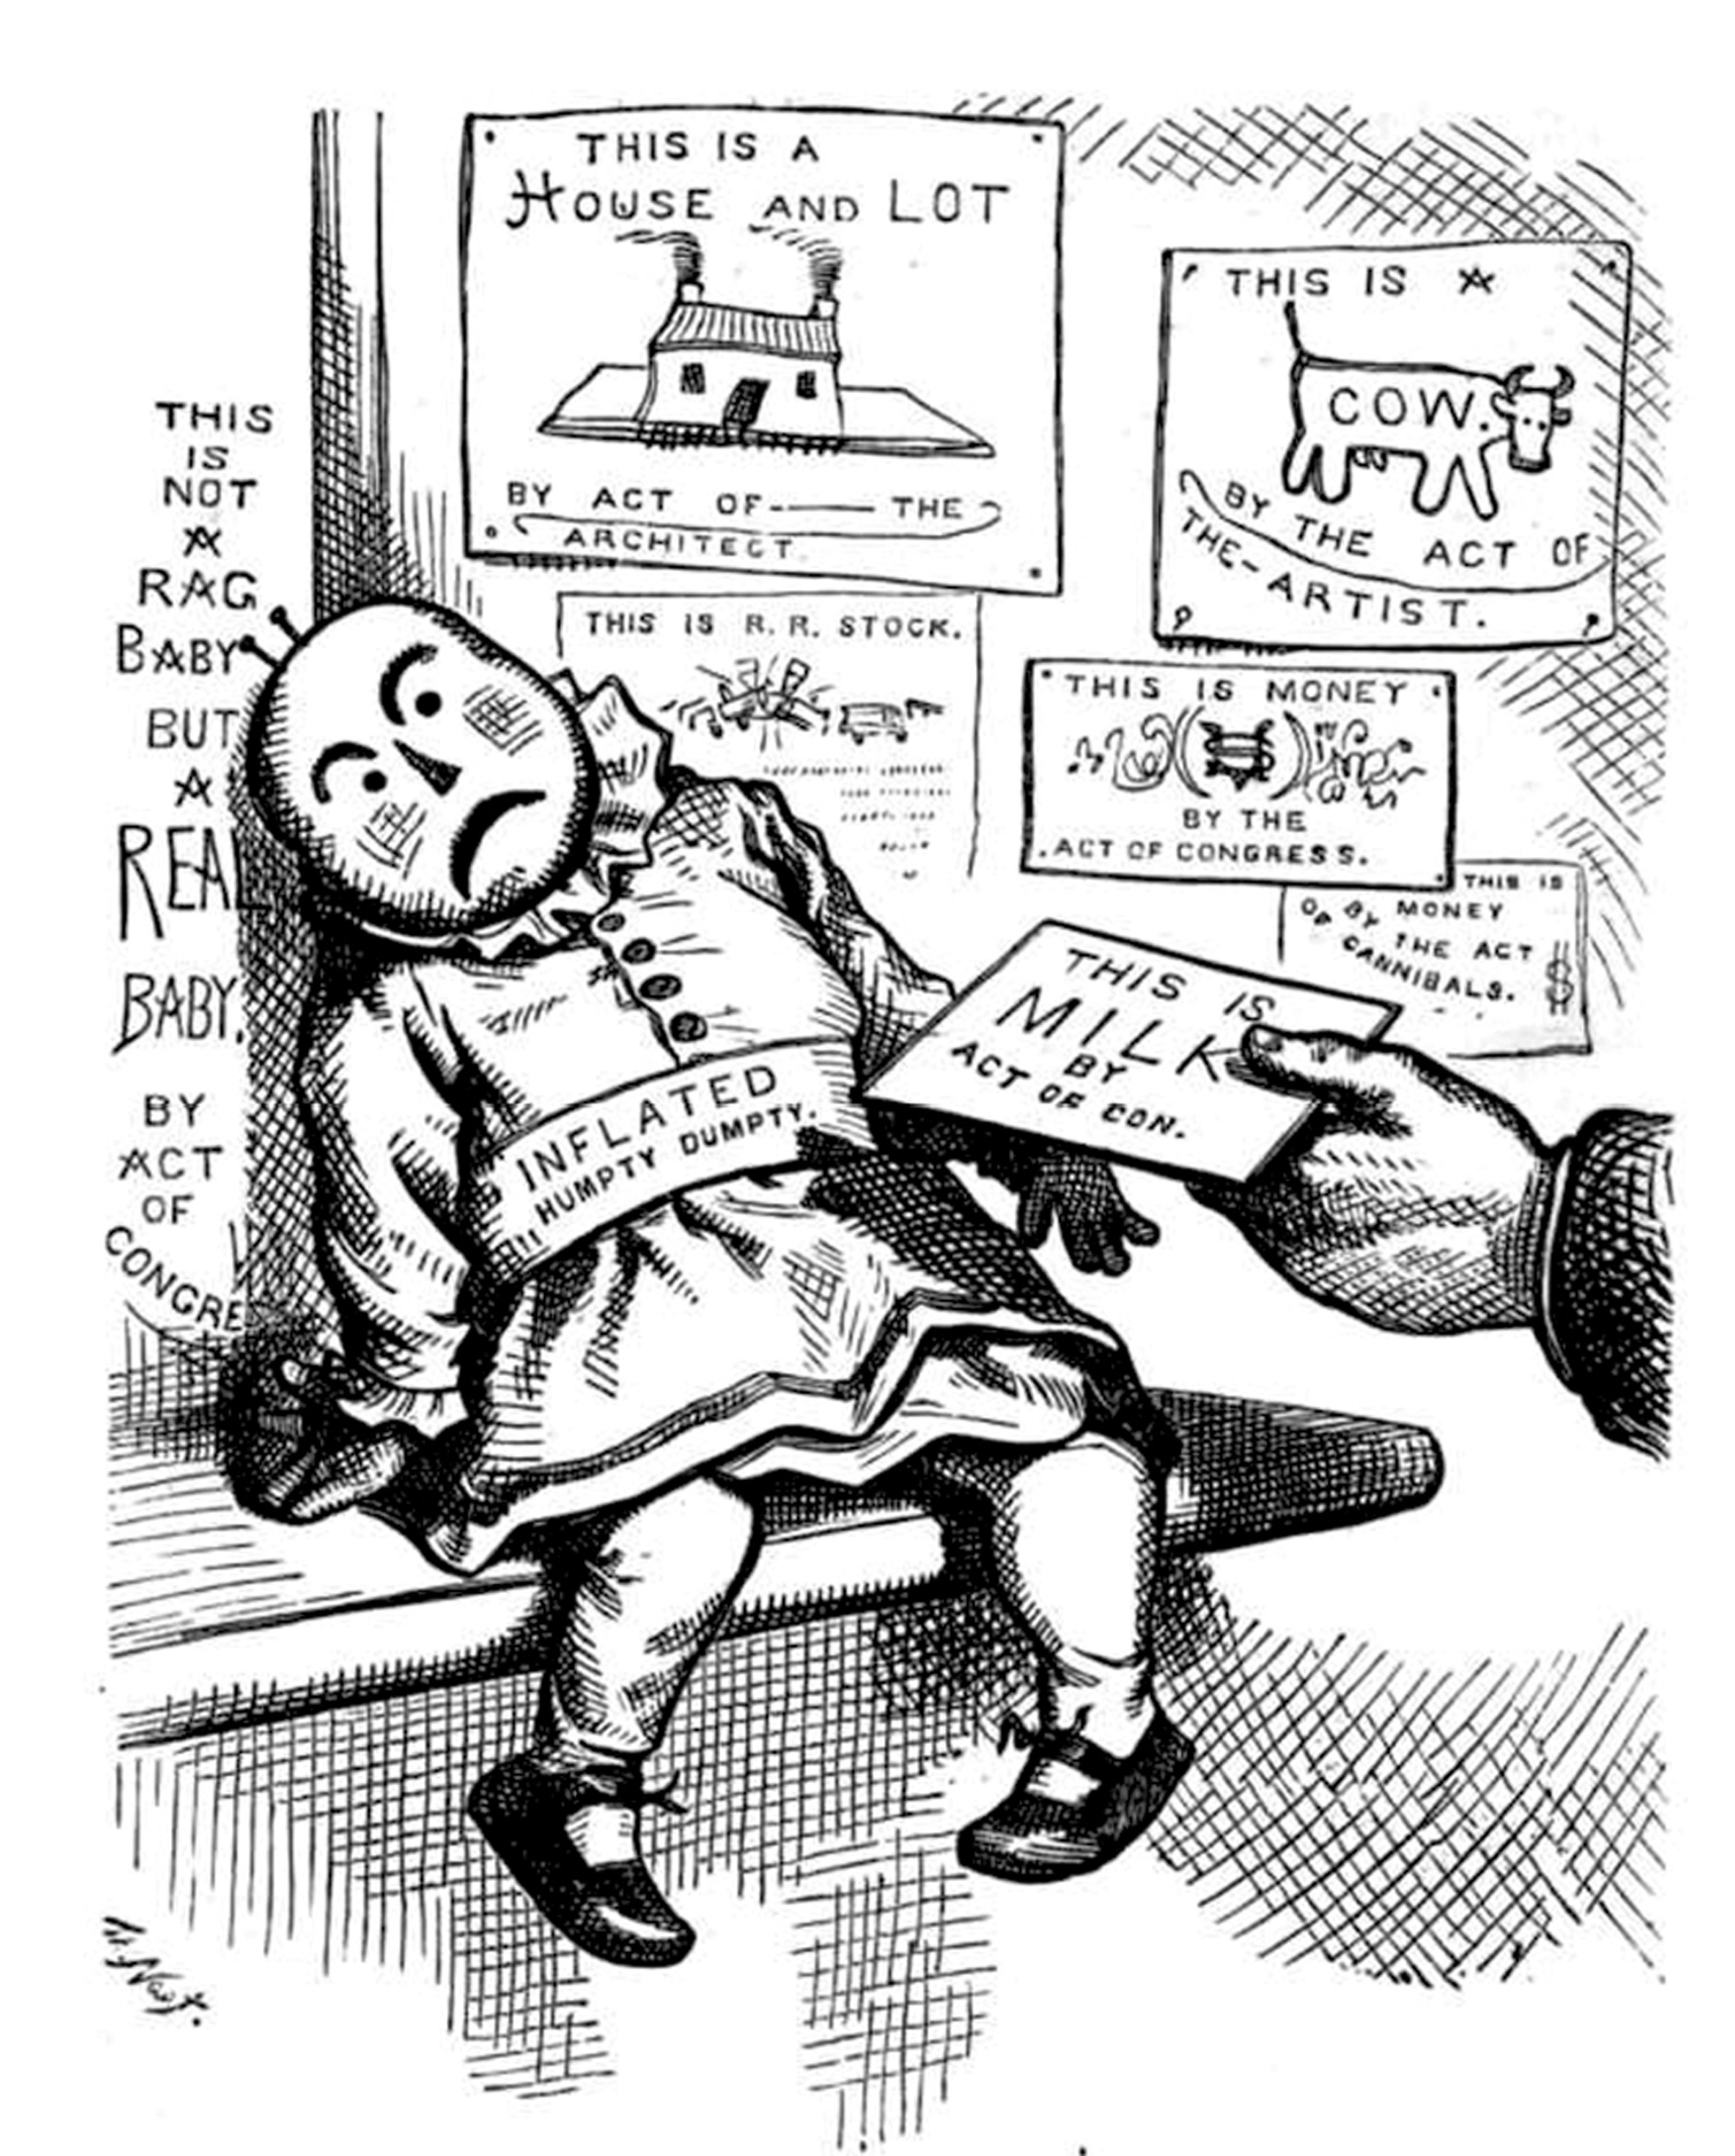 A circa eighteen seventy-six illustration titled “Milk Tickets for Babies, In Place of Milk” by Thomas Nast for David Wells’s book titled “Robinson Crusoe’s Money,” a critique of the paper money inflation caused by the Civil War.